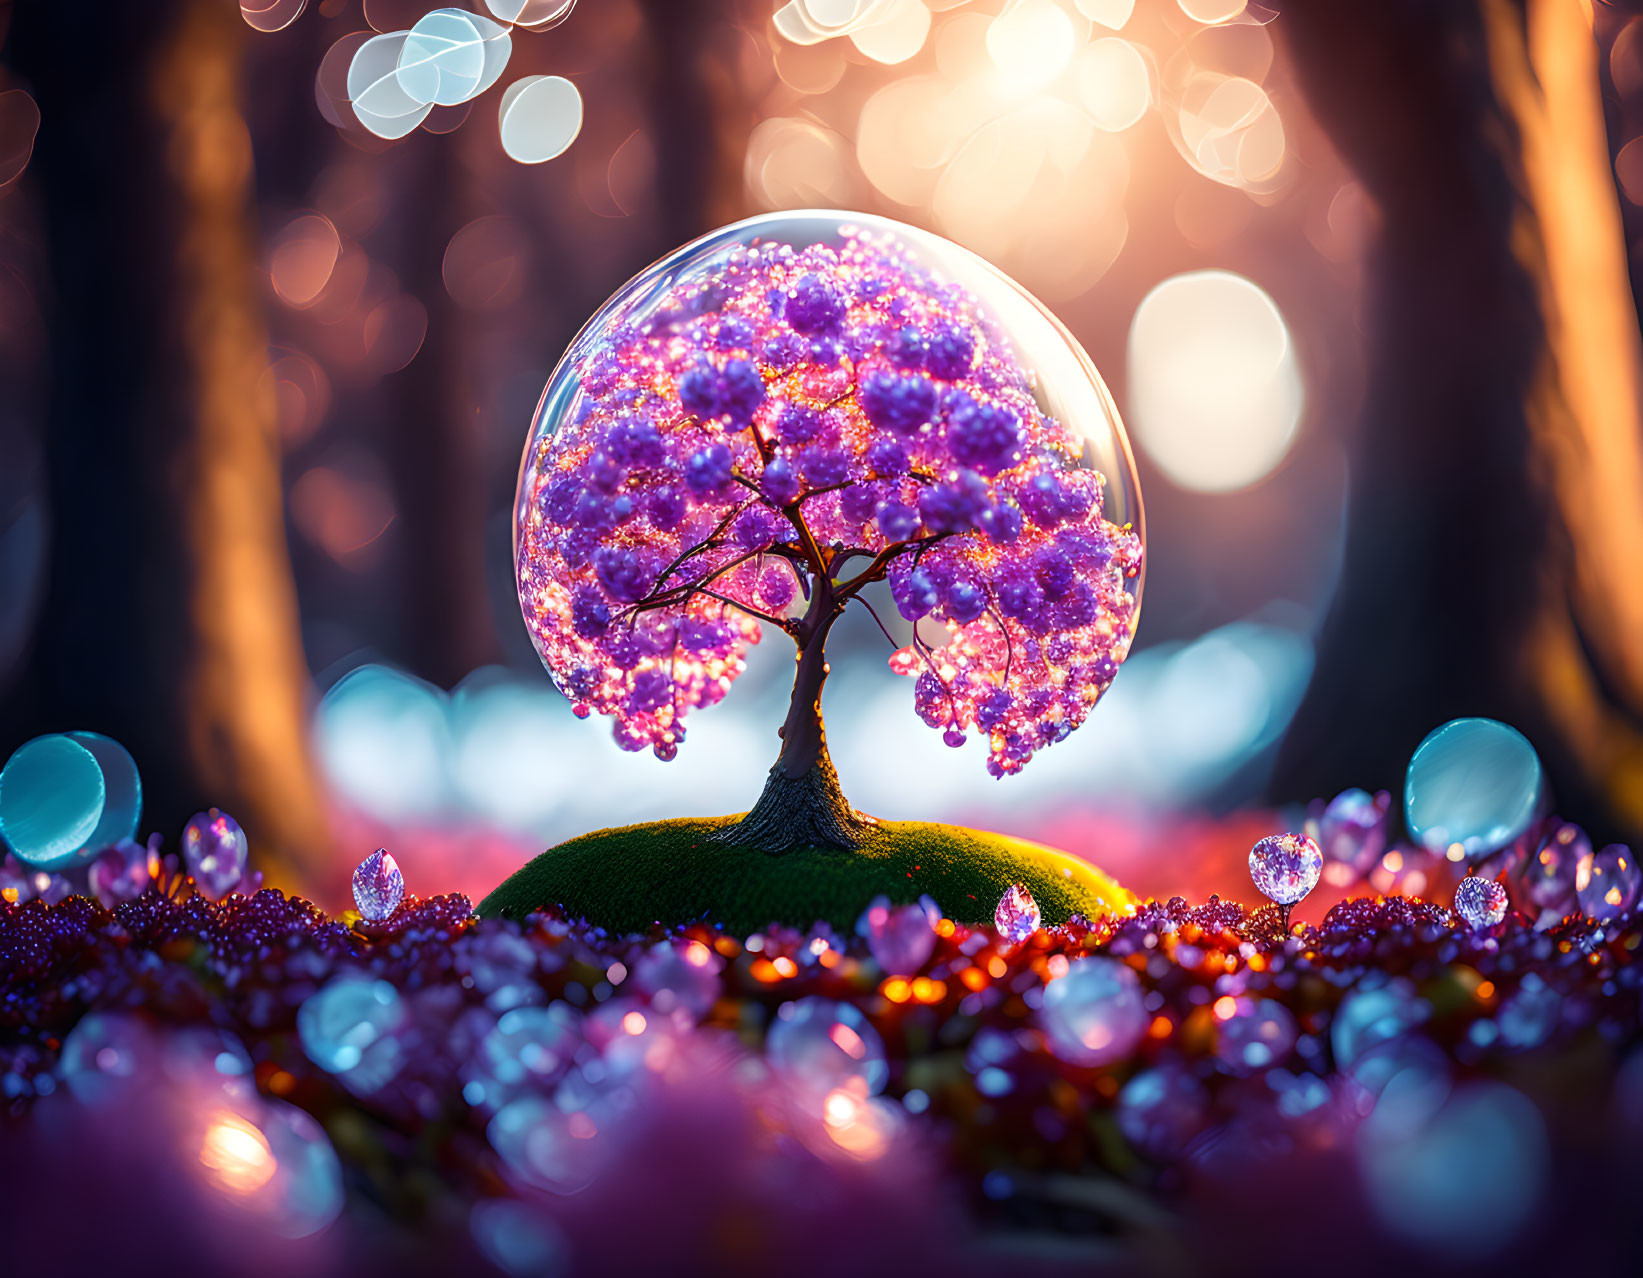 Miniature tree with purple blossoms in transparent sphere surrounded by glistening gems